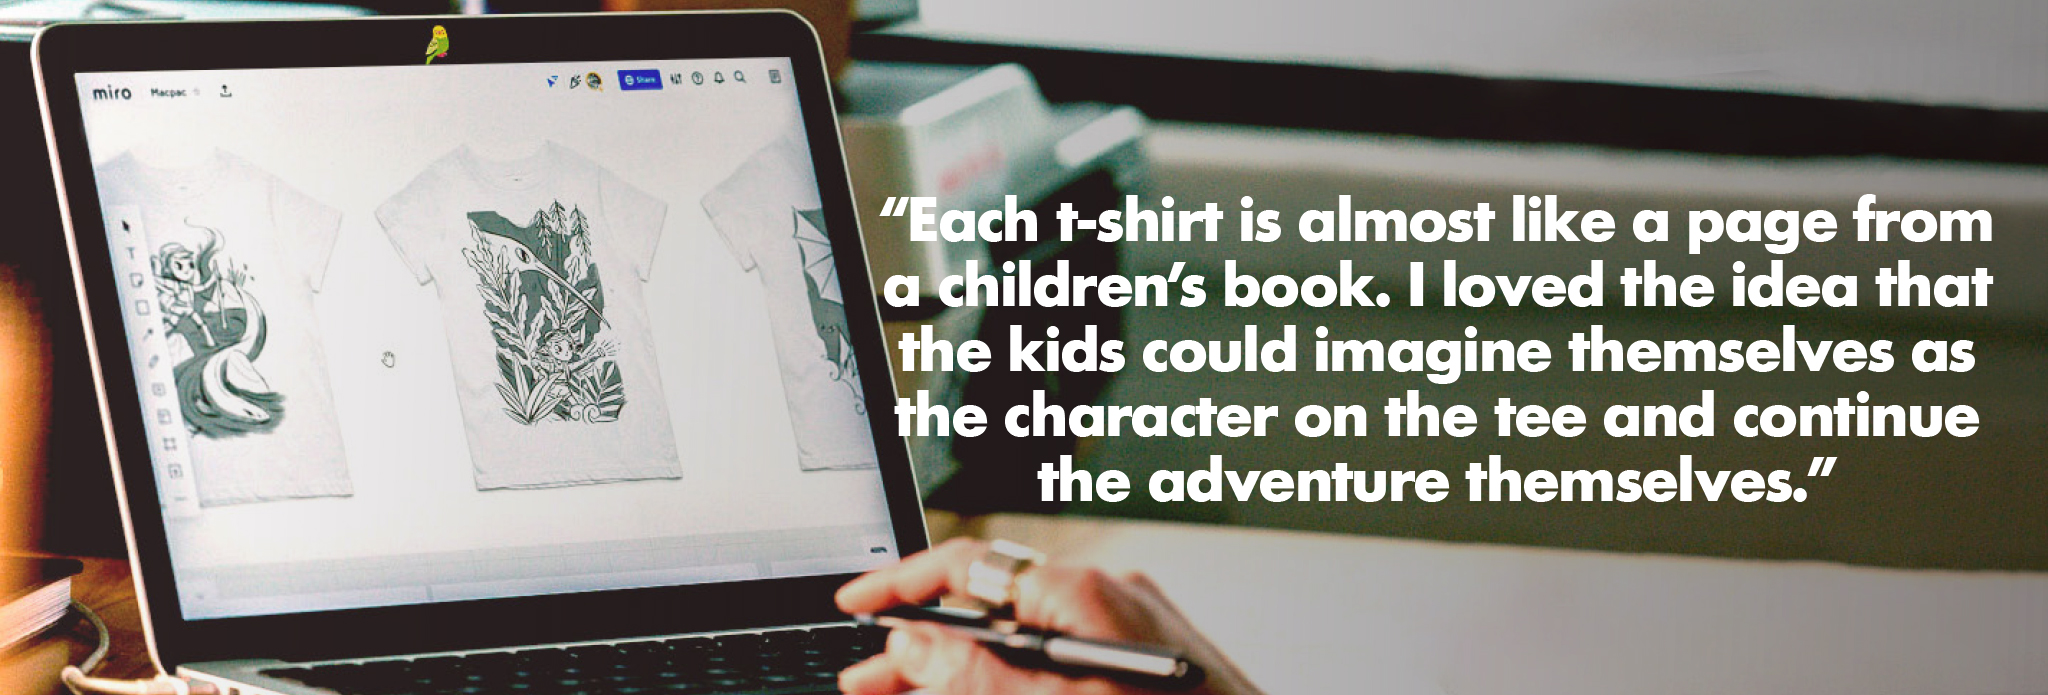 Each t-shirt is almost like a page from a childrens book. I loved the idea that the kids could imagine themselves as the character on the tee and continue the adventure themselves.